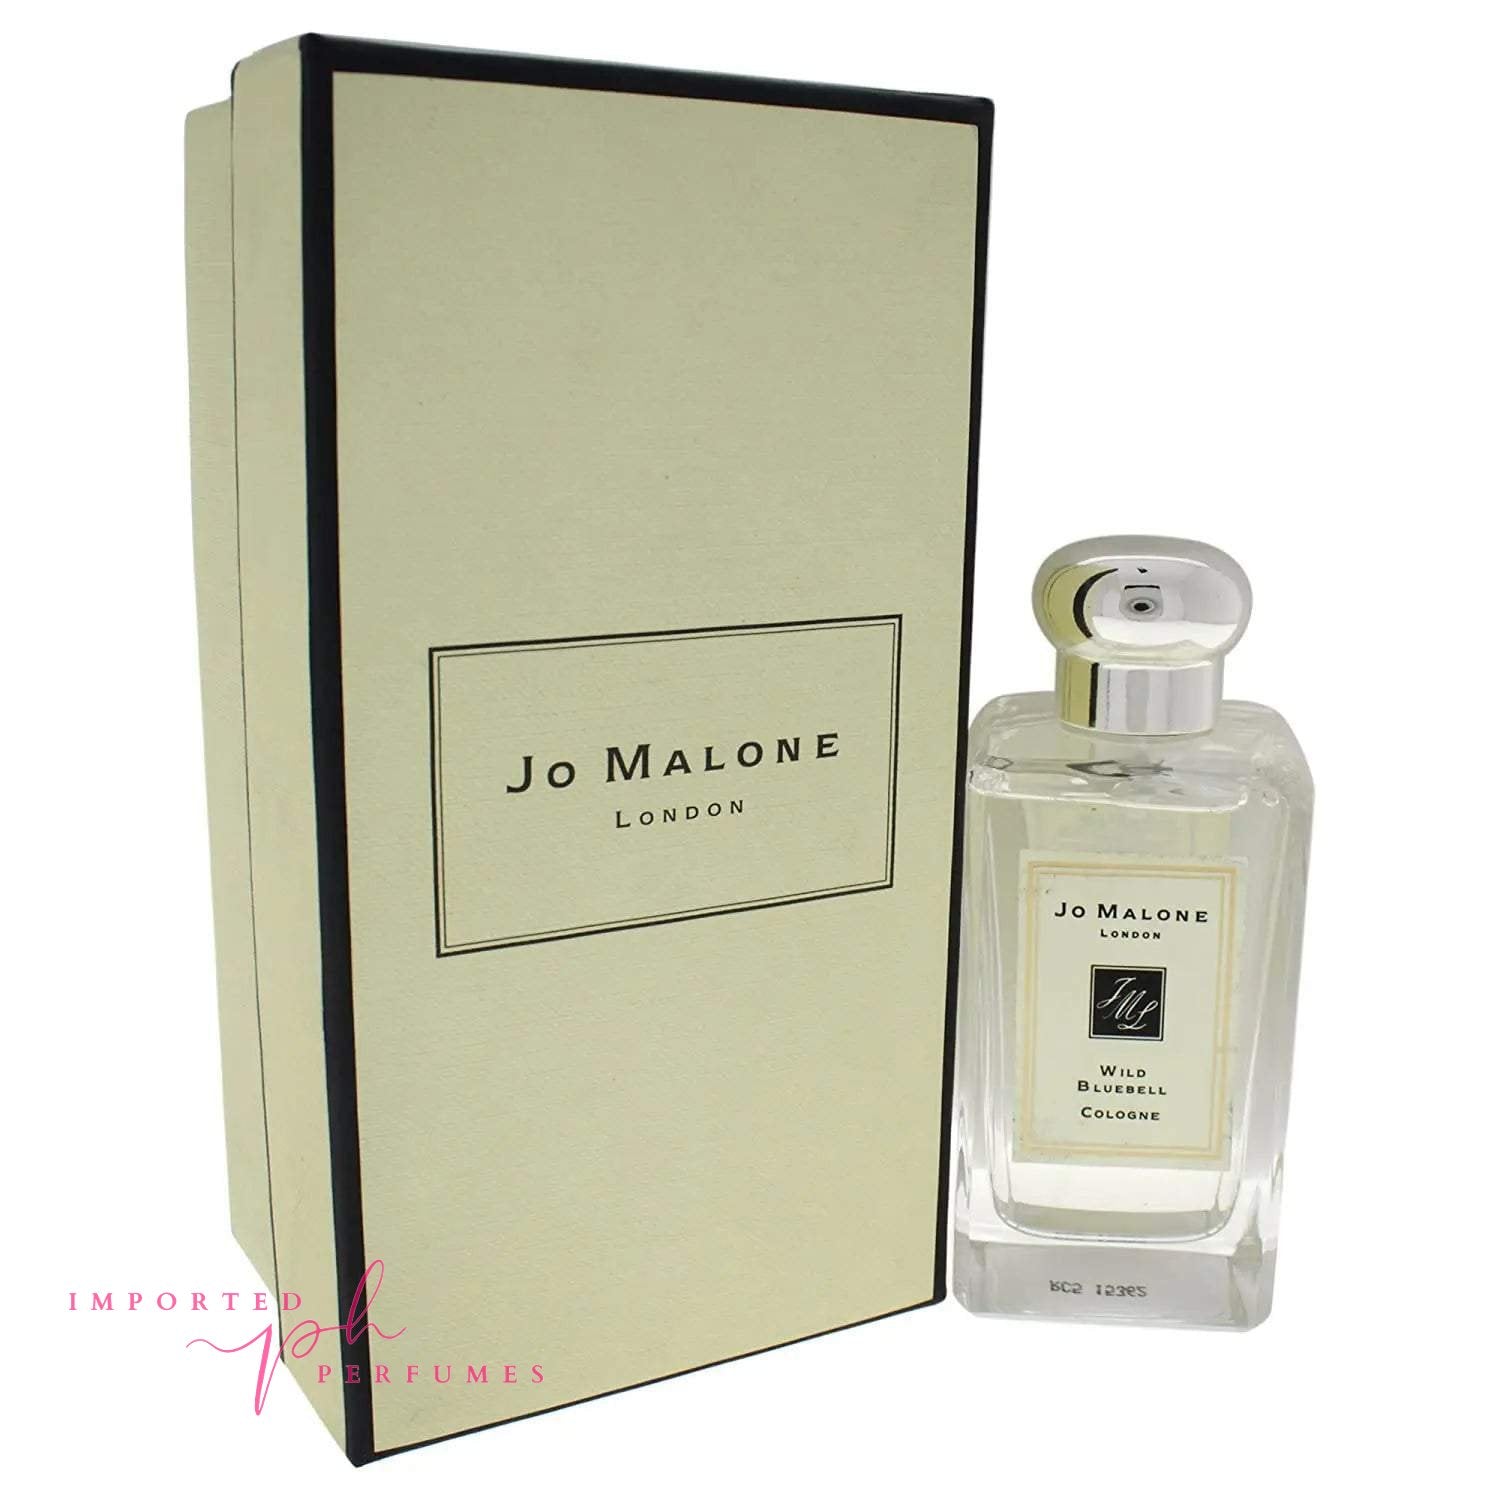 Jo Malone London Wild Bluebell Cologne Spray For Women 100ml-Imported Perfumes Co-jo malone,Jo Malone London,Wild Bluebell,women